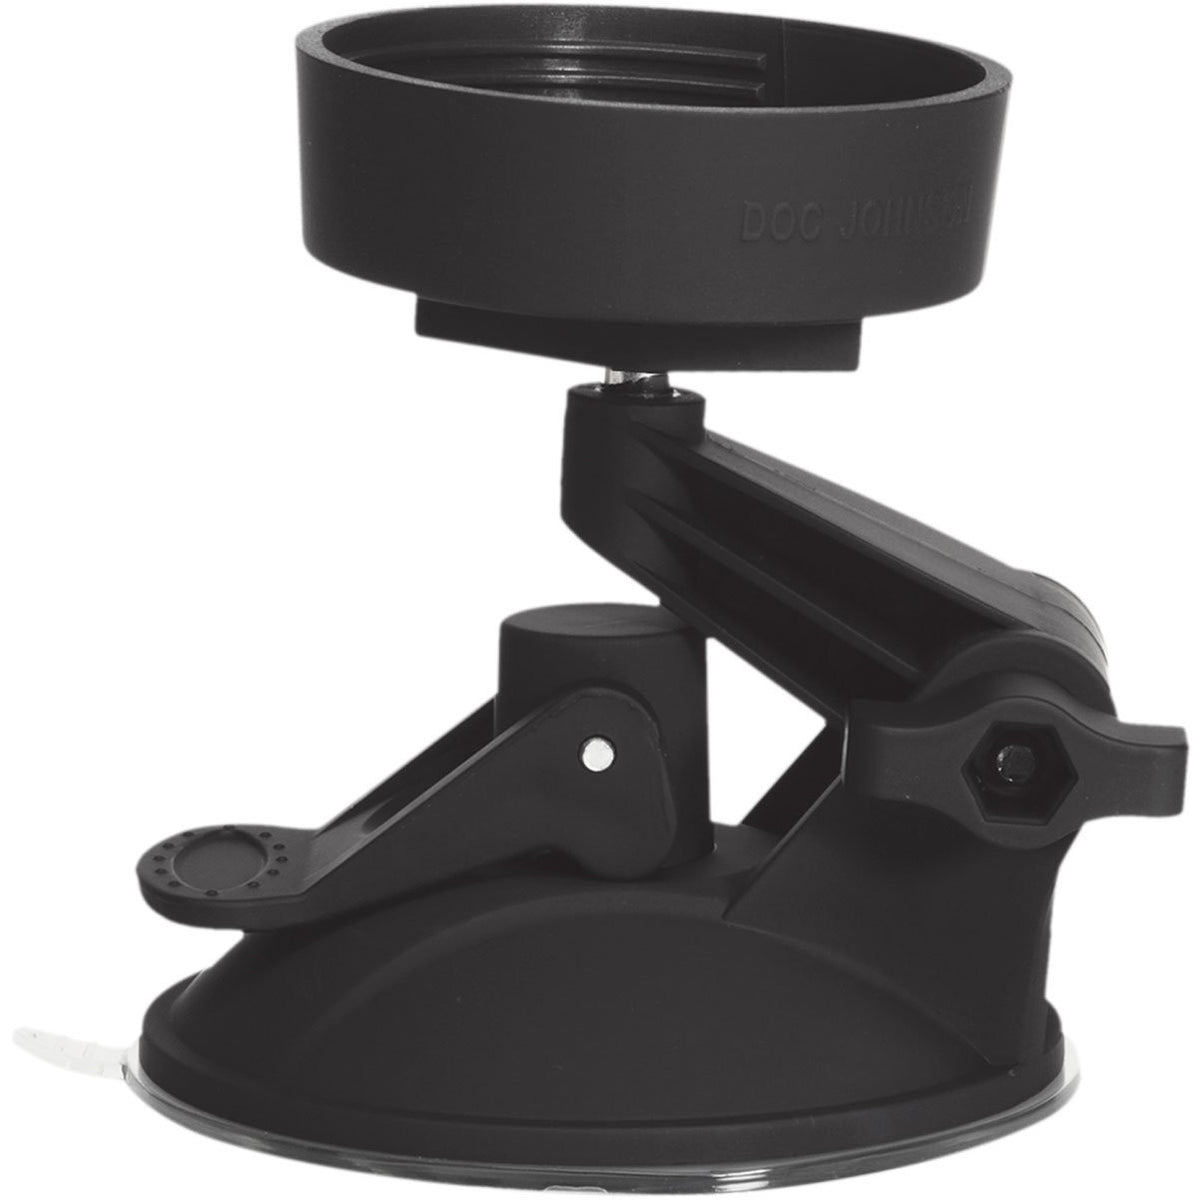 Doc Johnson Main Squeeze - Suction Cup Accessory